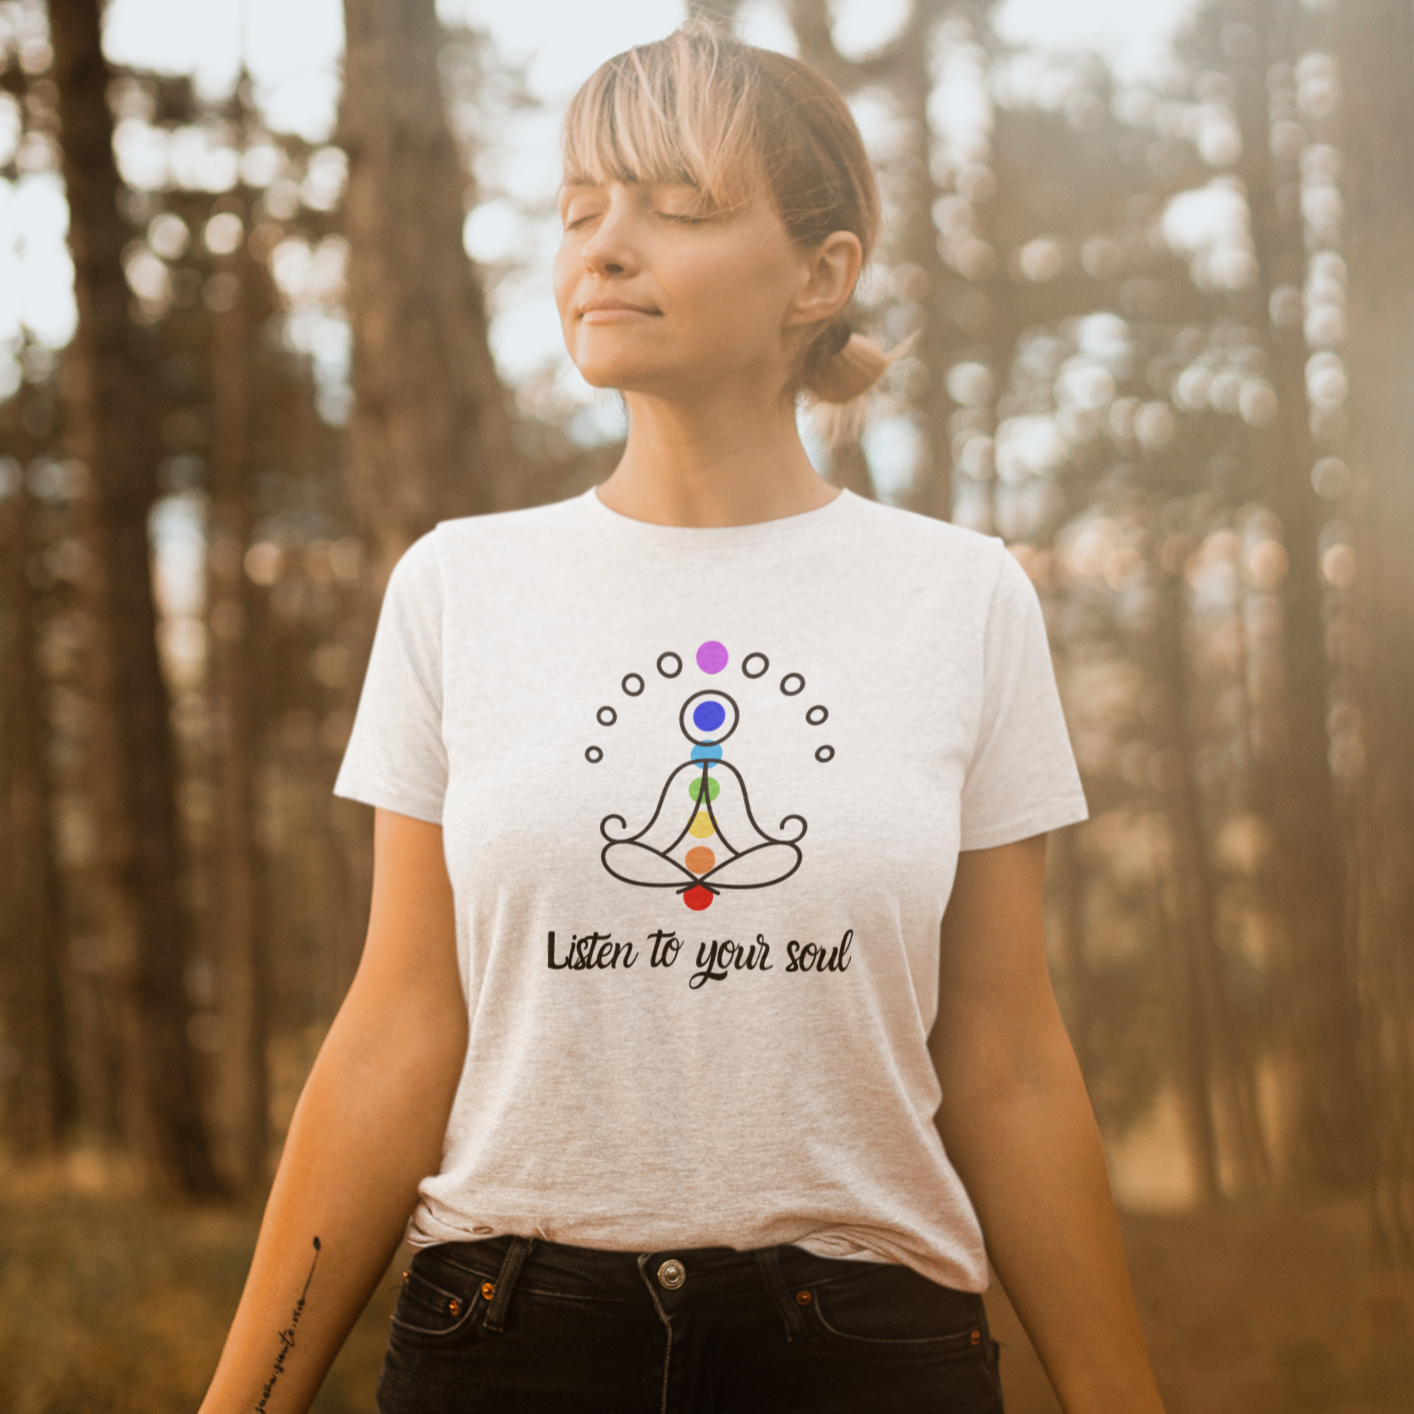 Story of Awakening Lifestyle Community Spirituality Relationships Love Light Meditation Oneness Earth Balance Healing Shop Store Charity Tree Nature Read Write T shirt Tops Tees Clothing Women Horoscope Organic Cotton Listen To Your Soul Quote